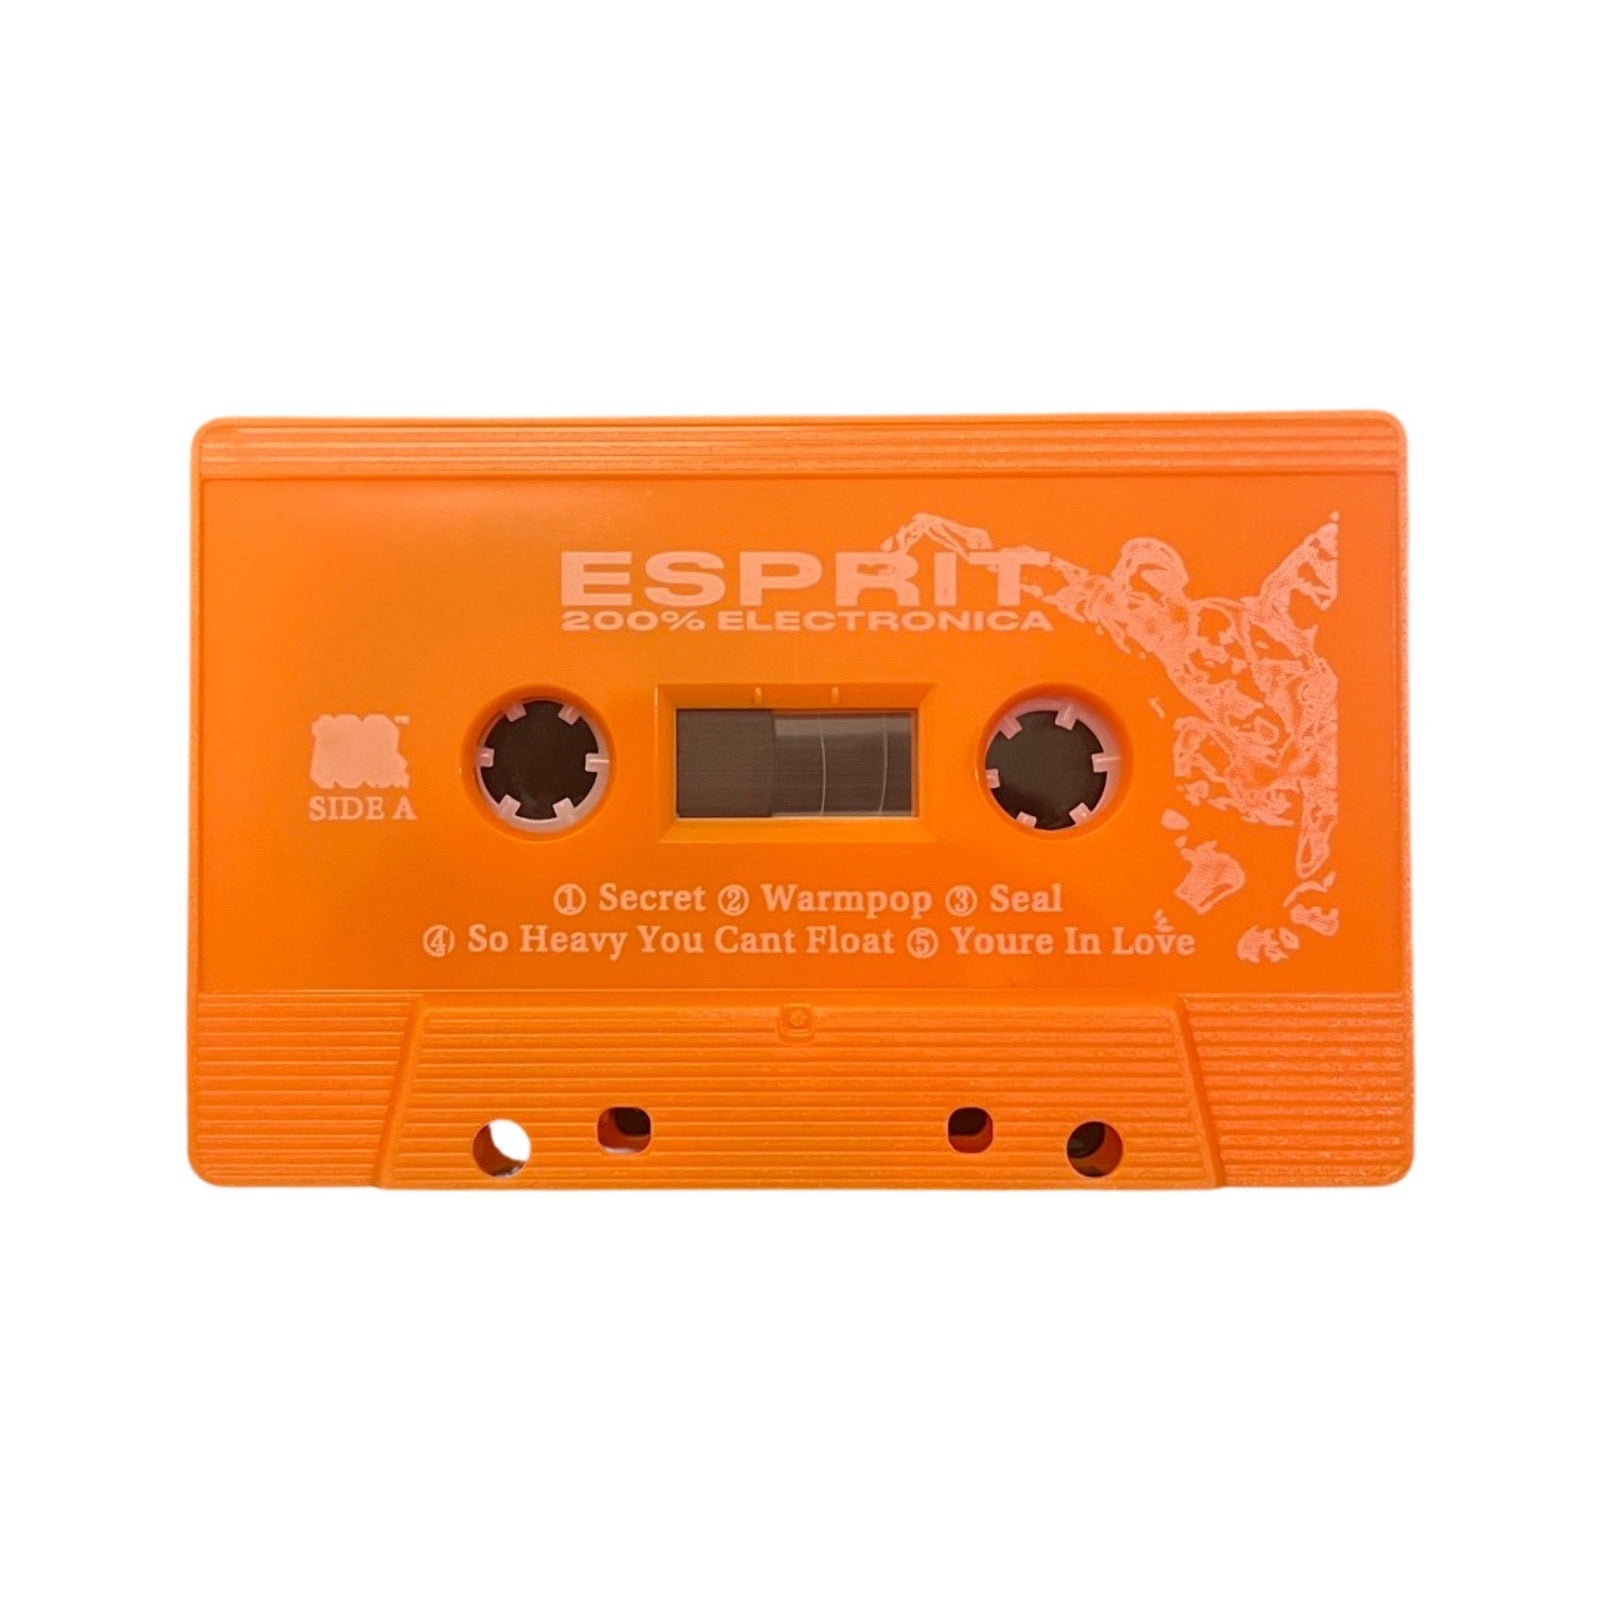 ESPRIT 空想 - 200% Electronica Cassette - 100% Electronica Official Store (Photo 2)